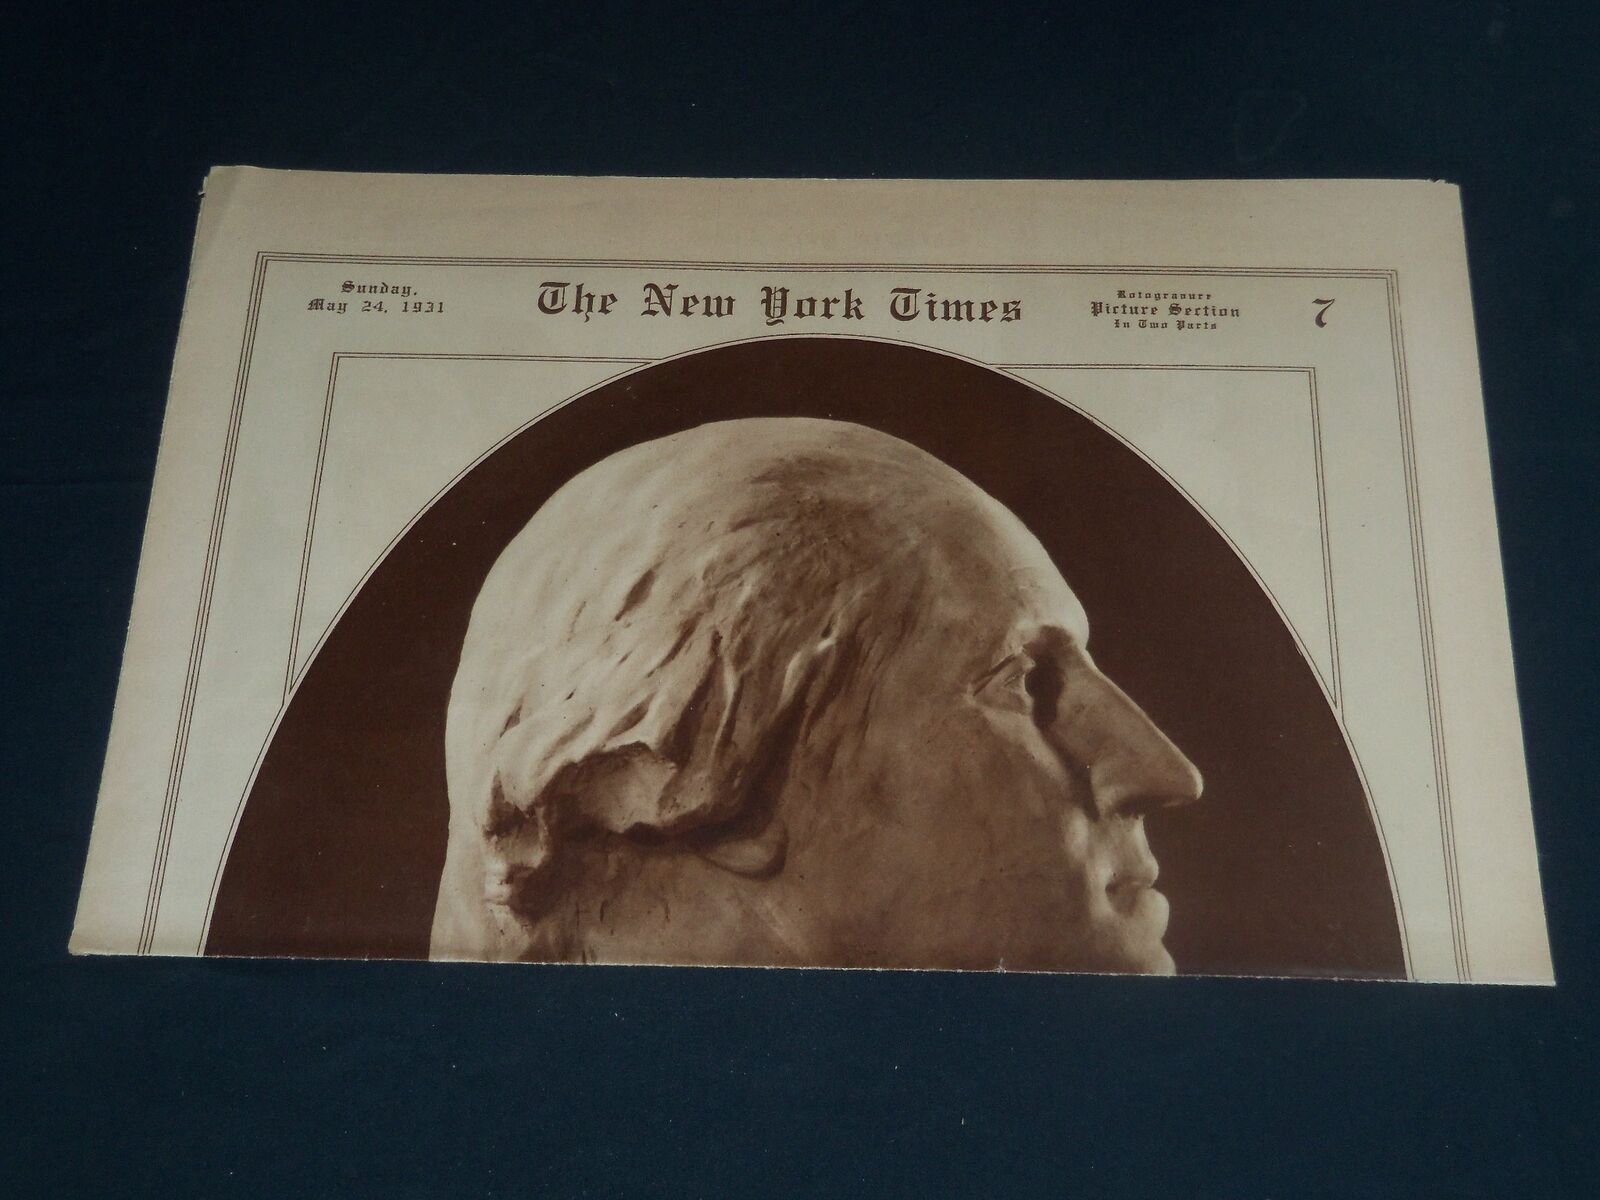 1931 MAY 24 NEW YORK TIMES PICTURE SECTION - GEORGE WASHINGTON - NP 3844